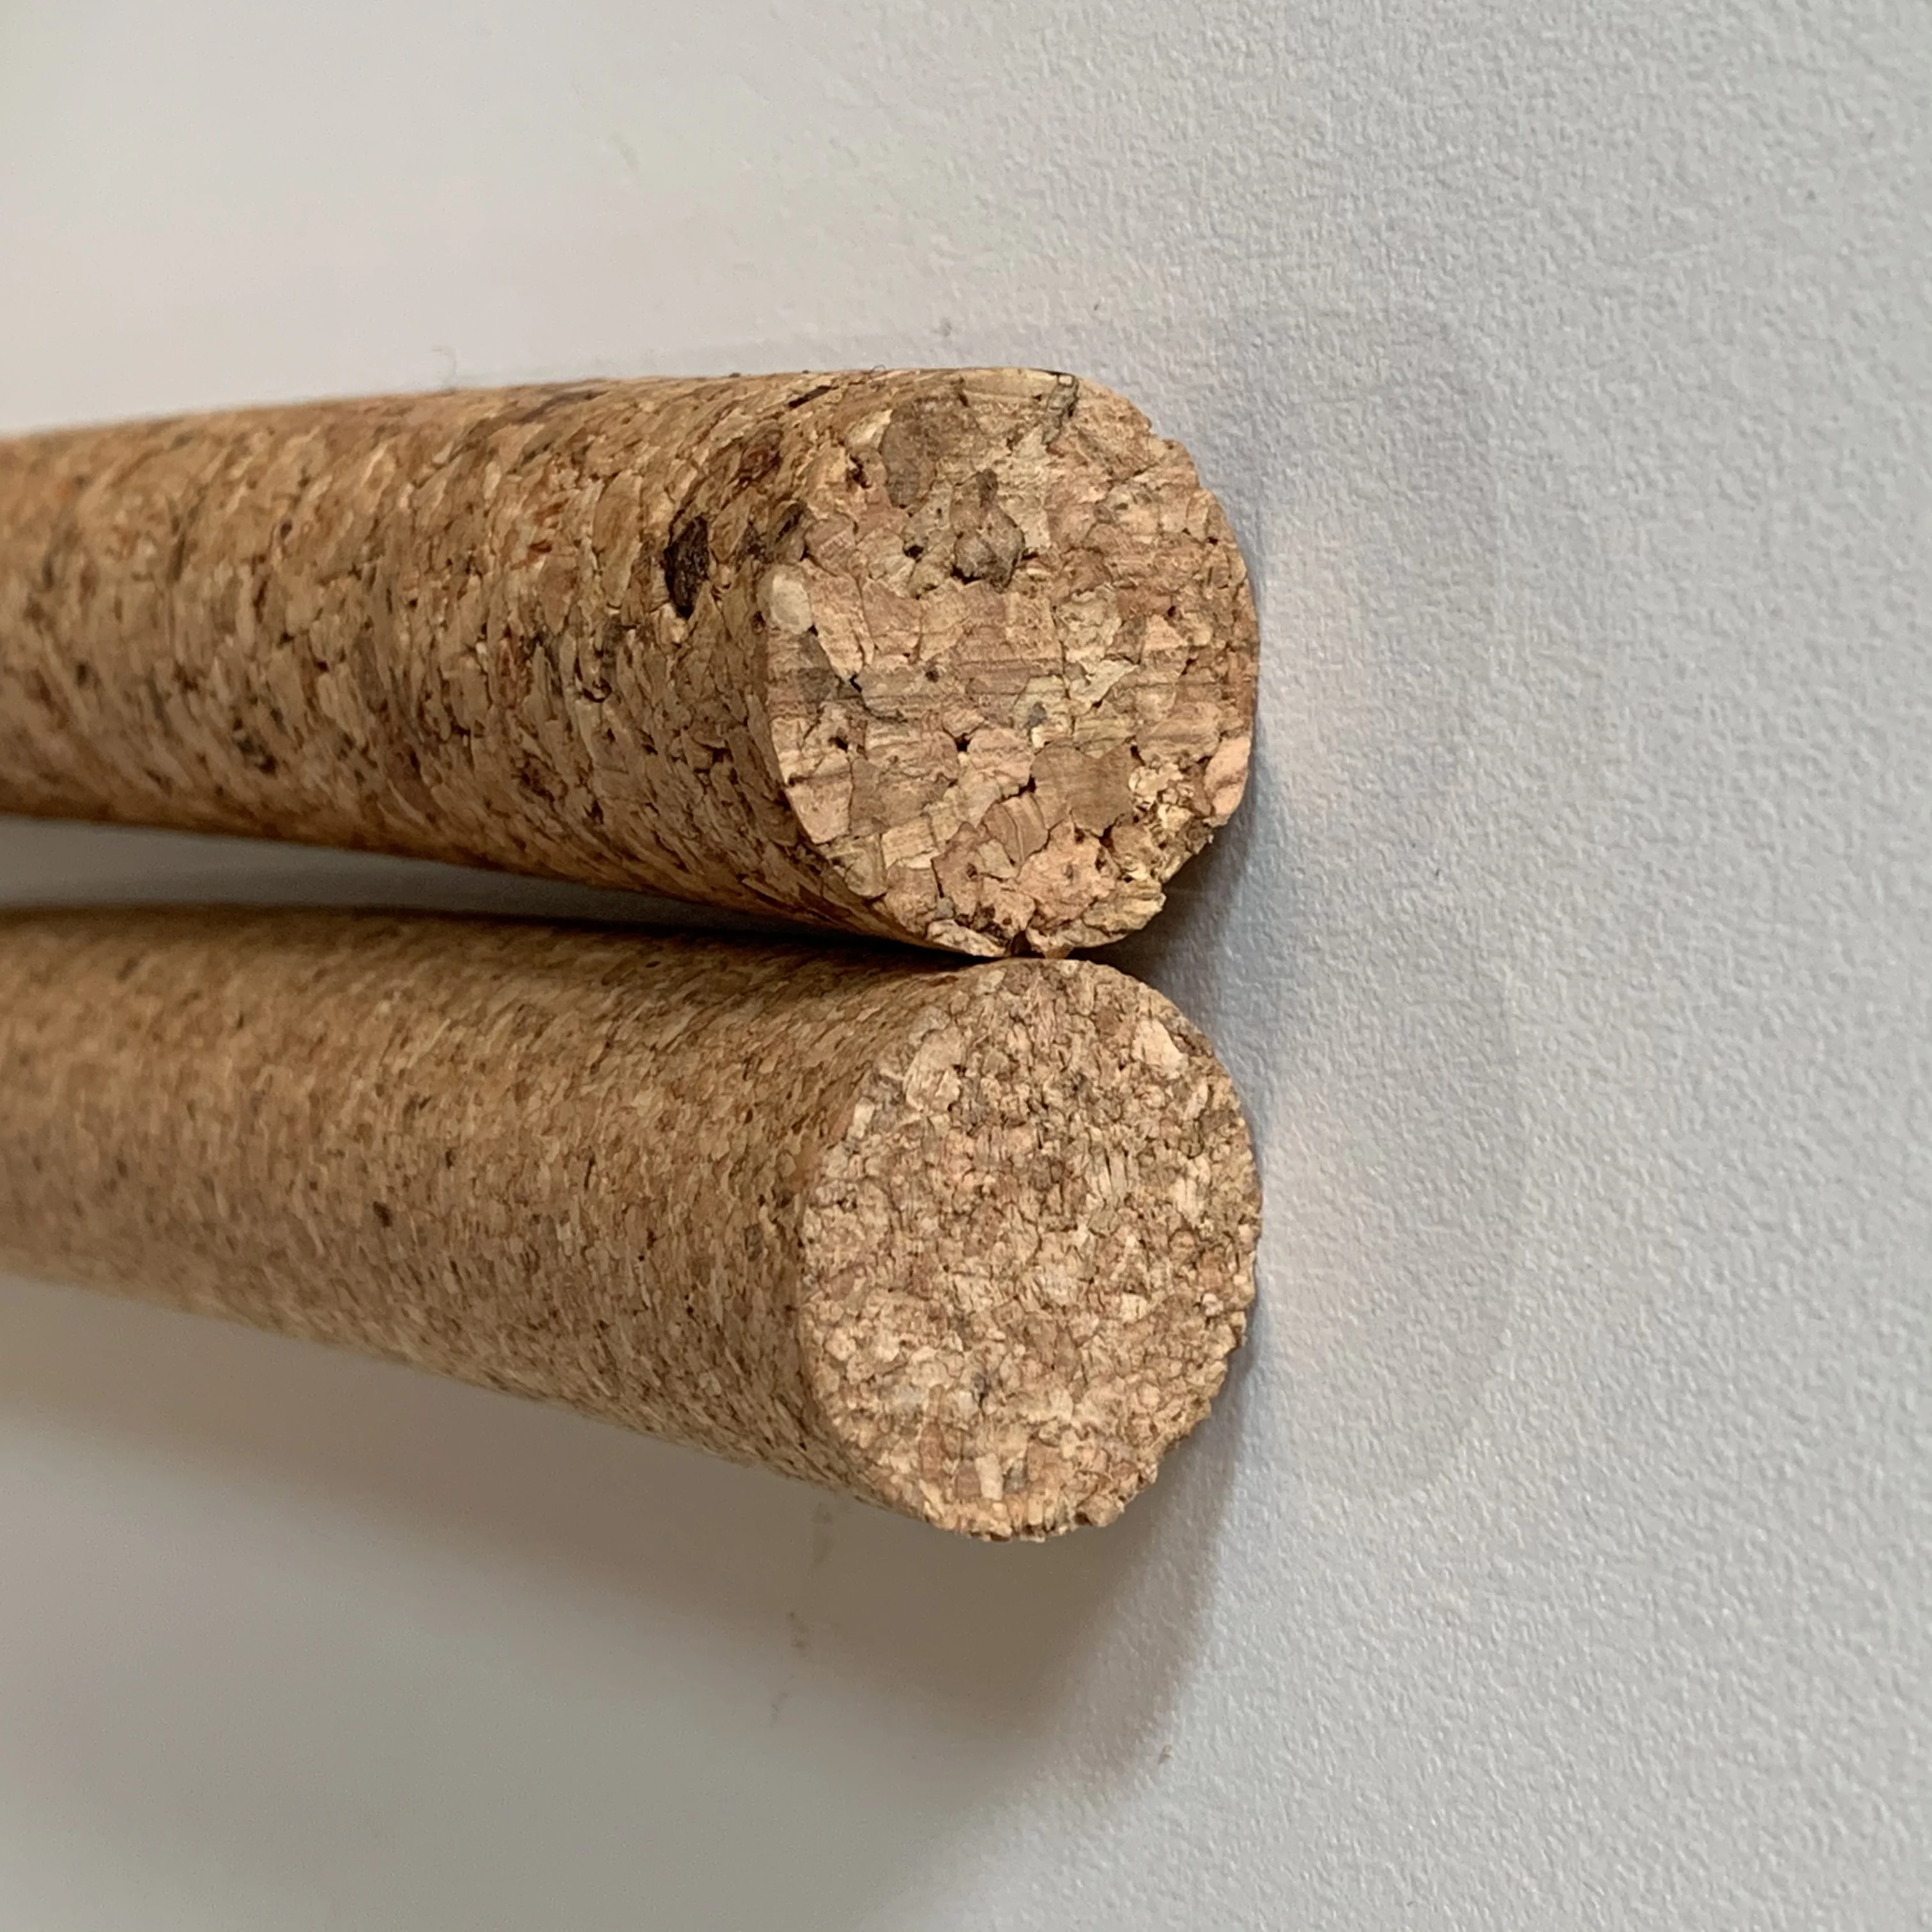 25mm dia agglomerated cork rod for wine cork stopper production